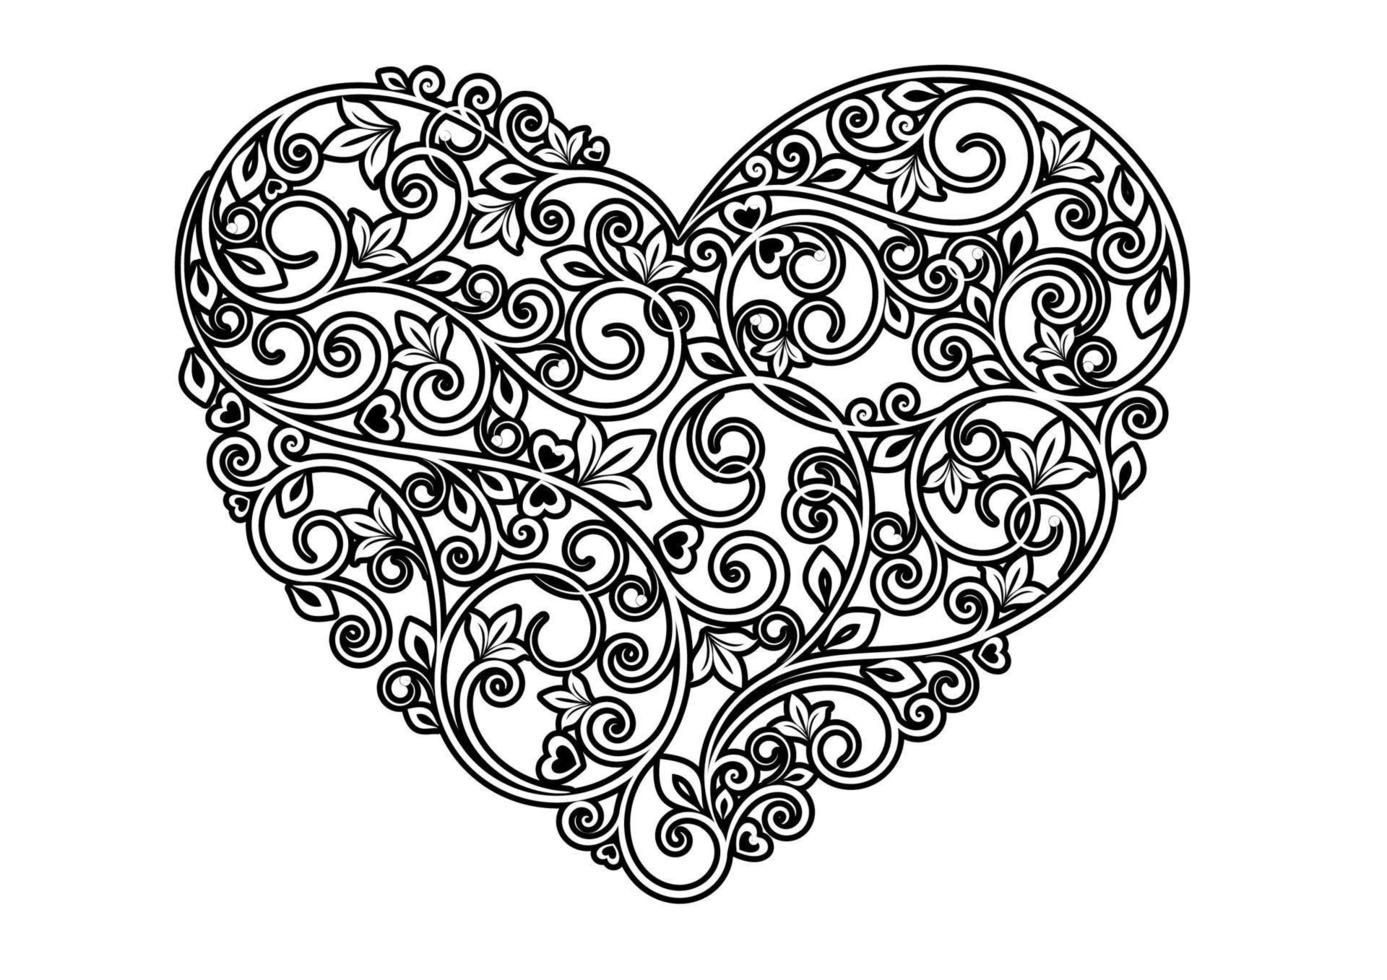 Floral heart with ornamental elements vector